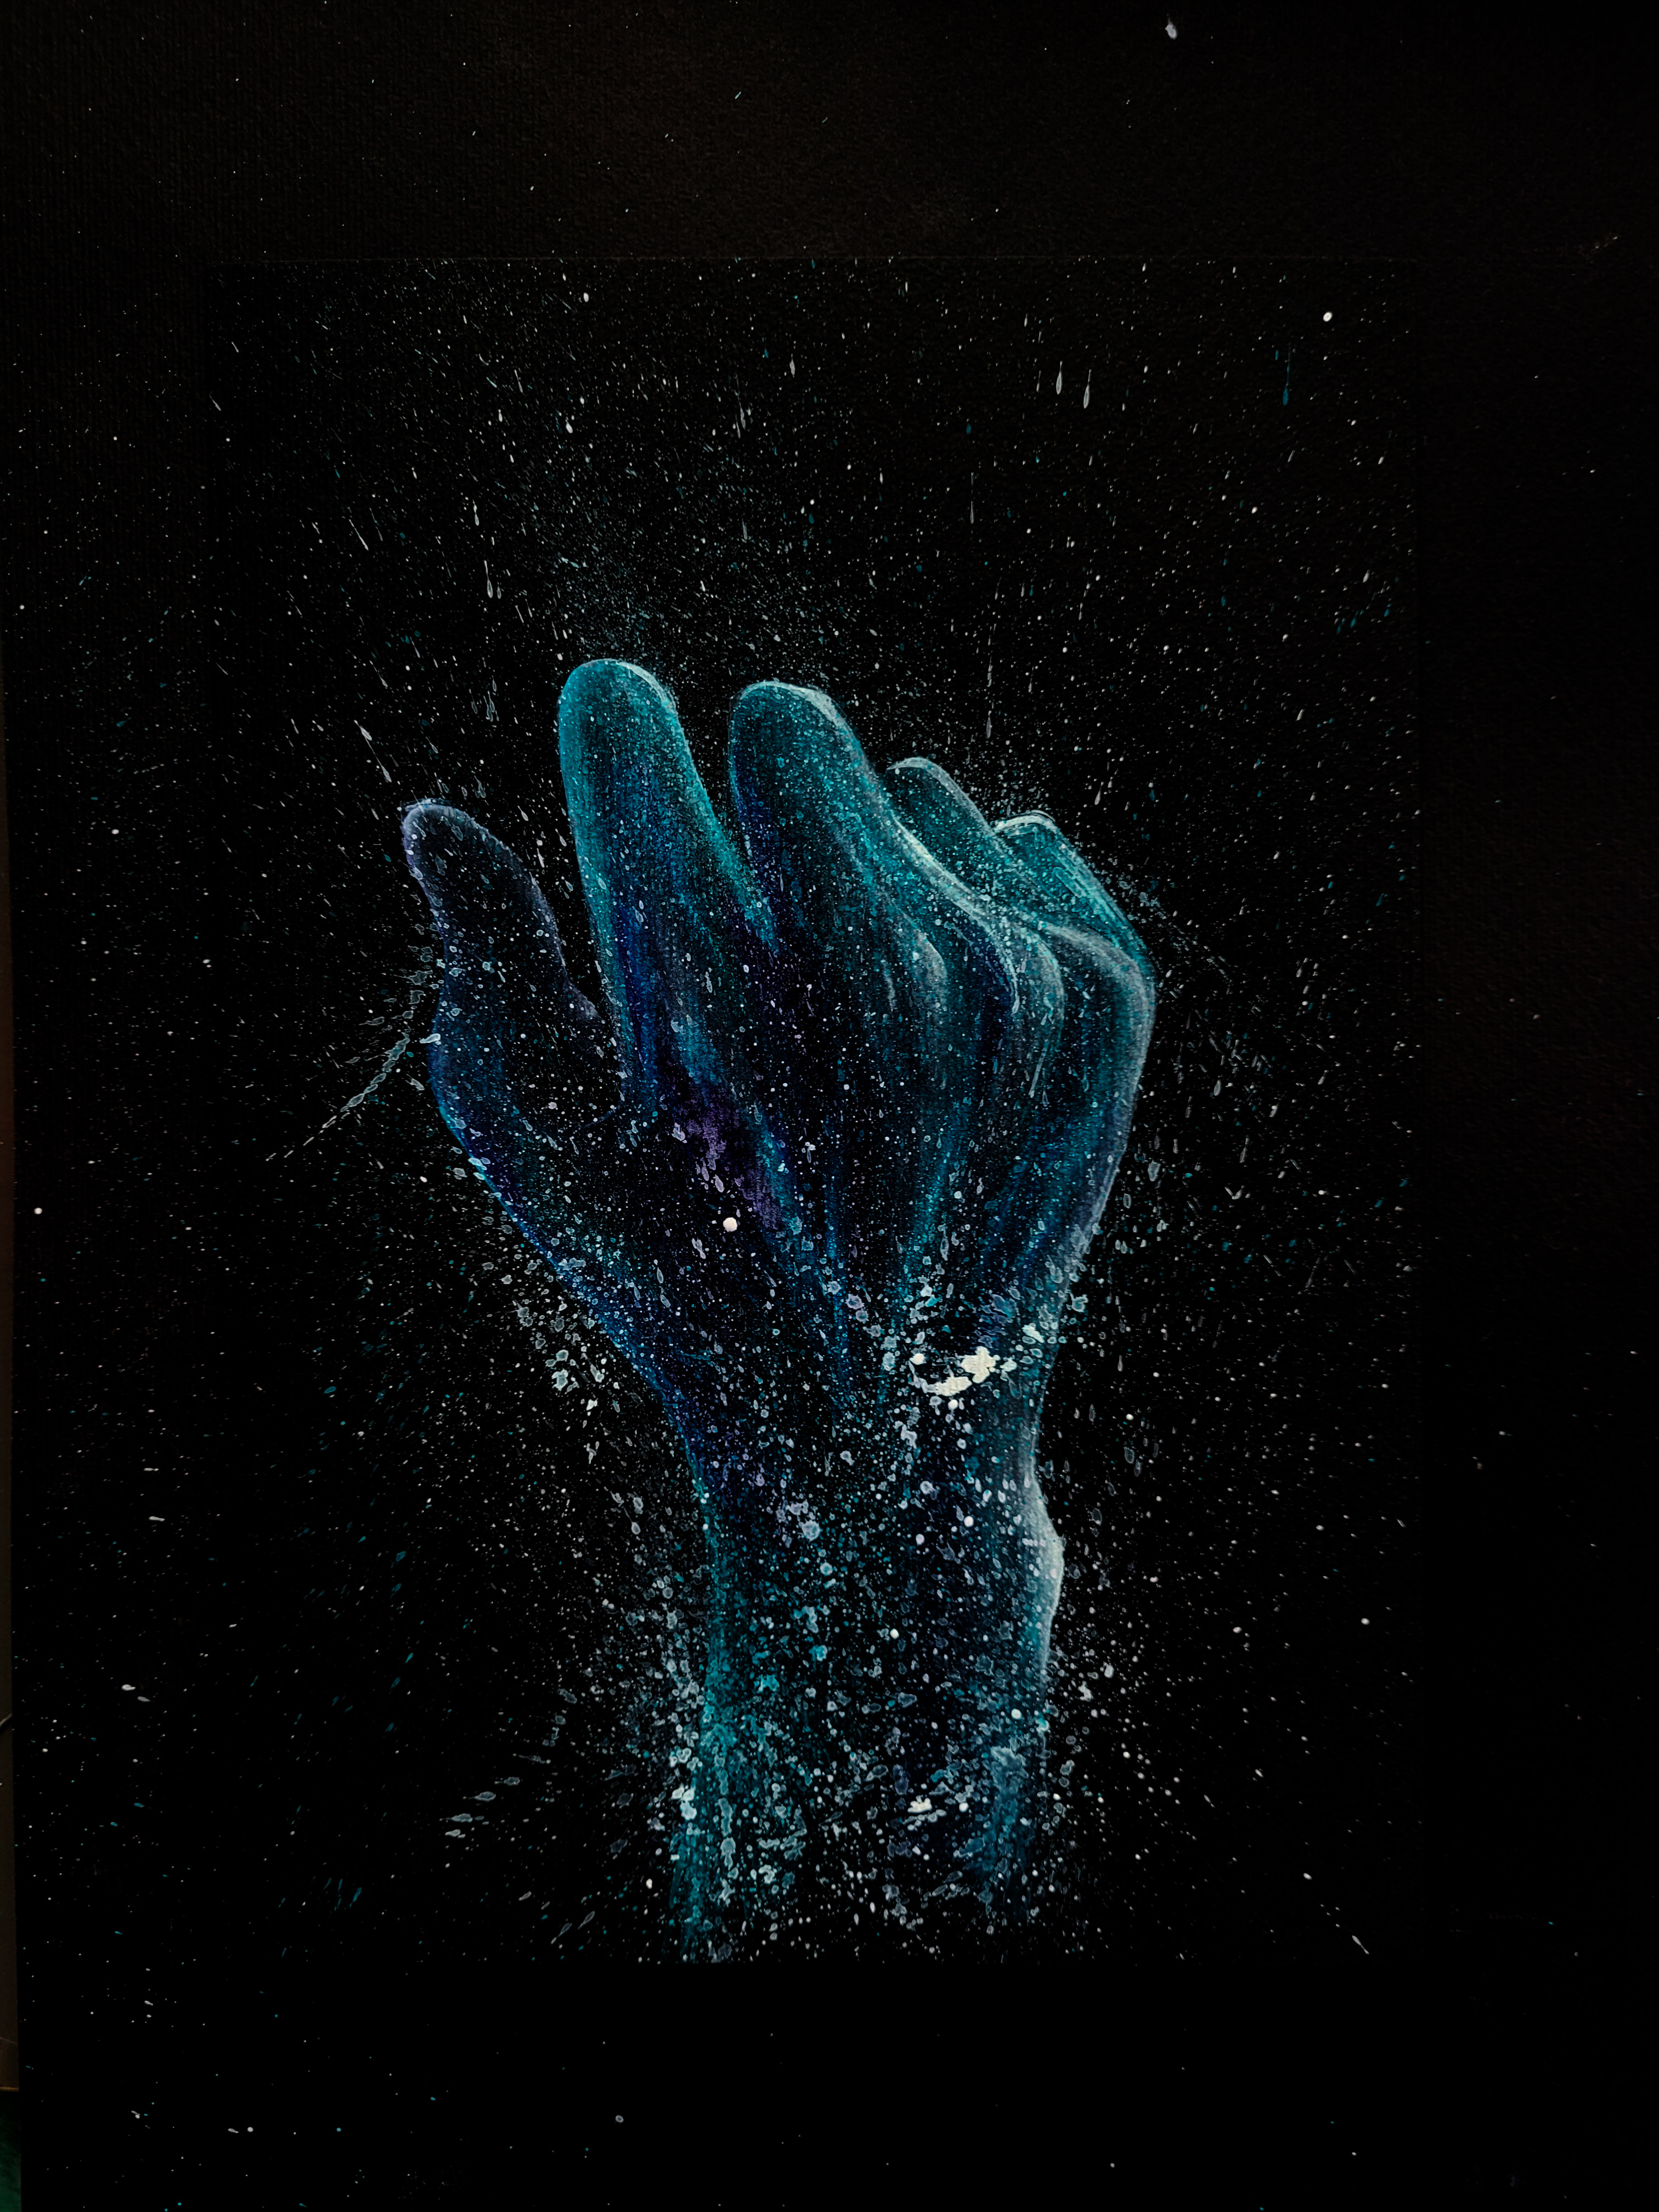 A sketch of the ghostly hand made for setting up colors and the general idea. Watercolor on black paper. 